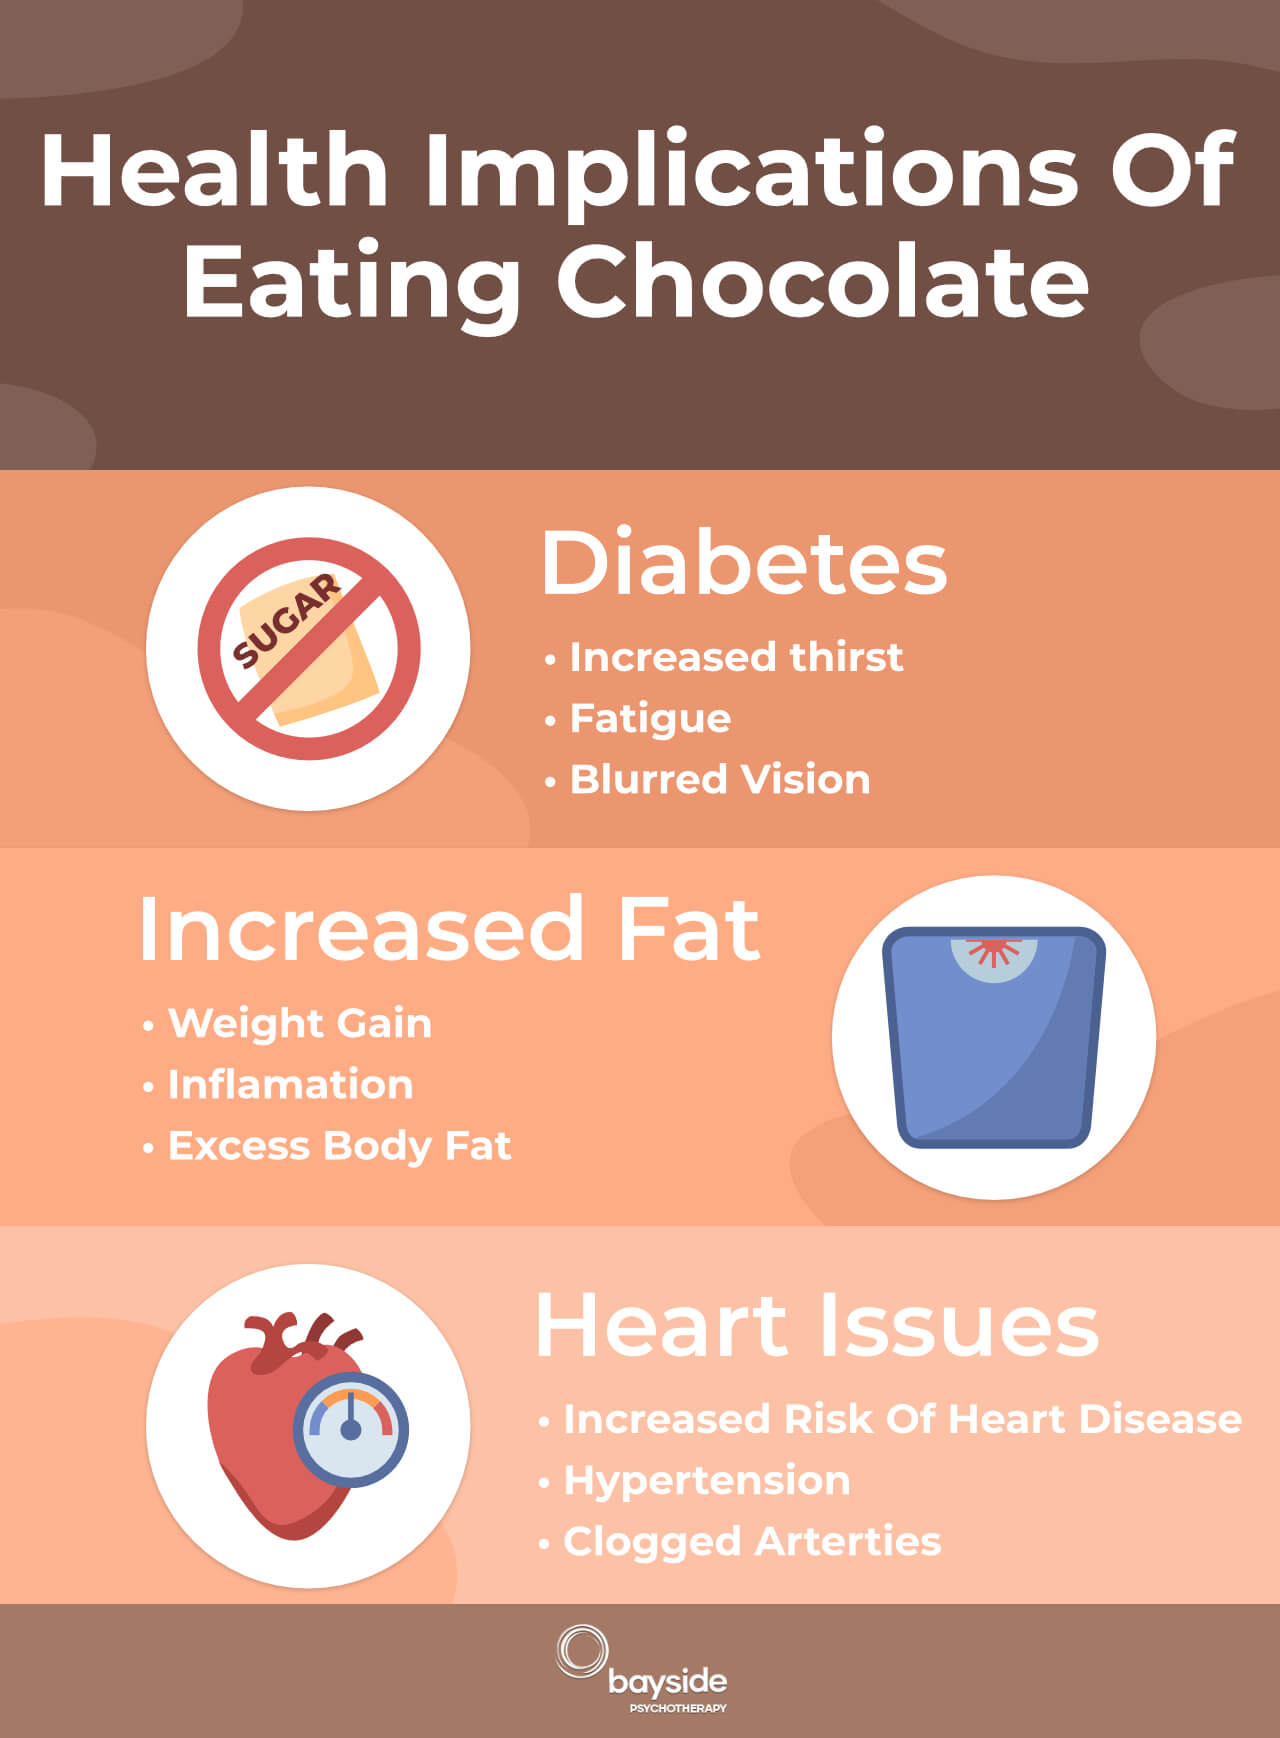 Health Implications Eating Chocolate - Bayside Hypnotherapy